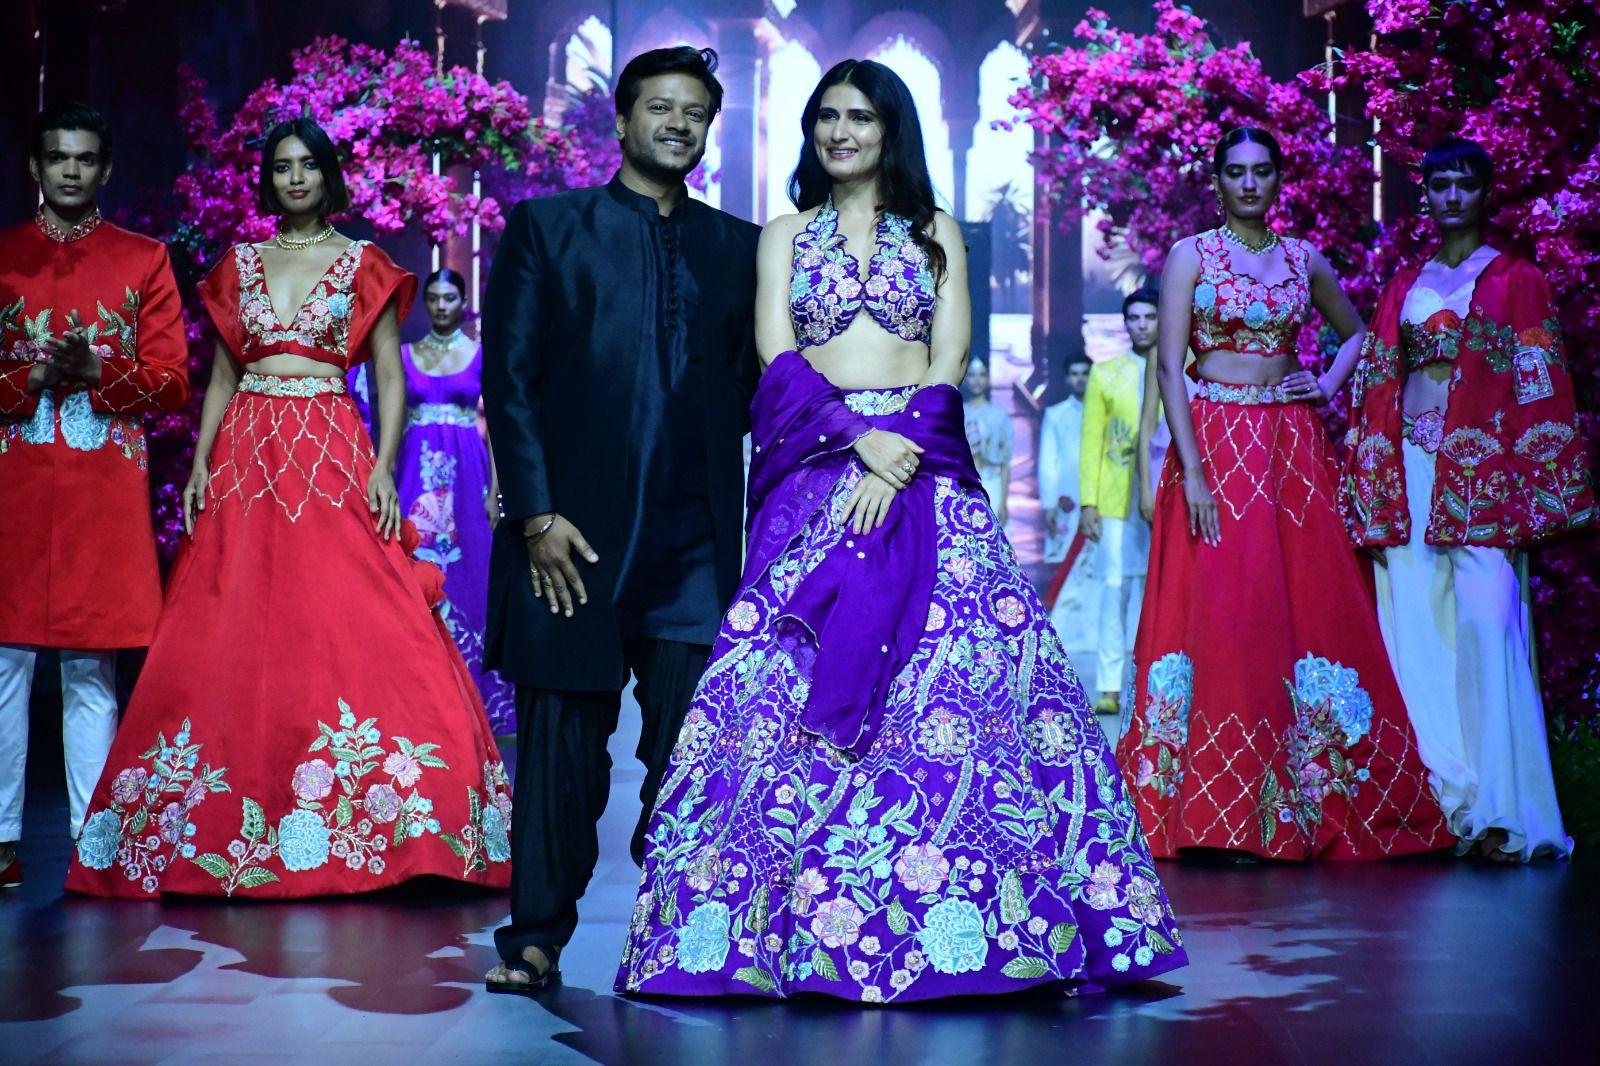  Her ensemble included a stylish purple outfit with floral embellishments, consisting of a chic top paired with an elegant skirt. Completing the look was a matching dupatta with beautiful embroidery.